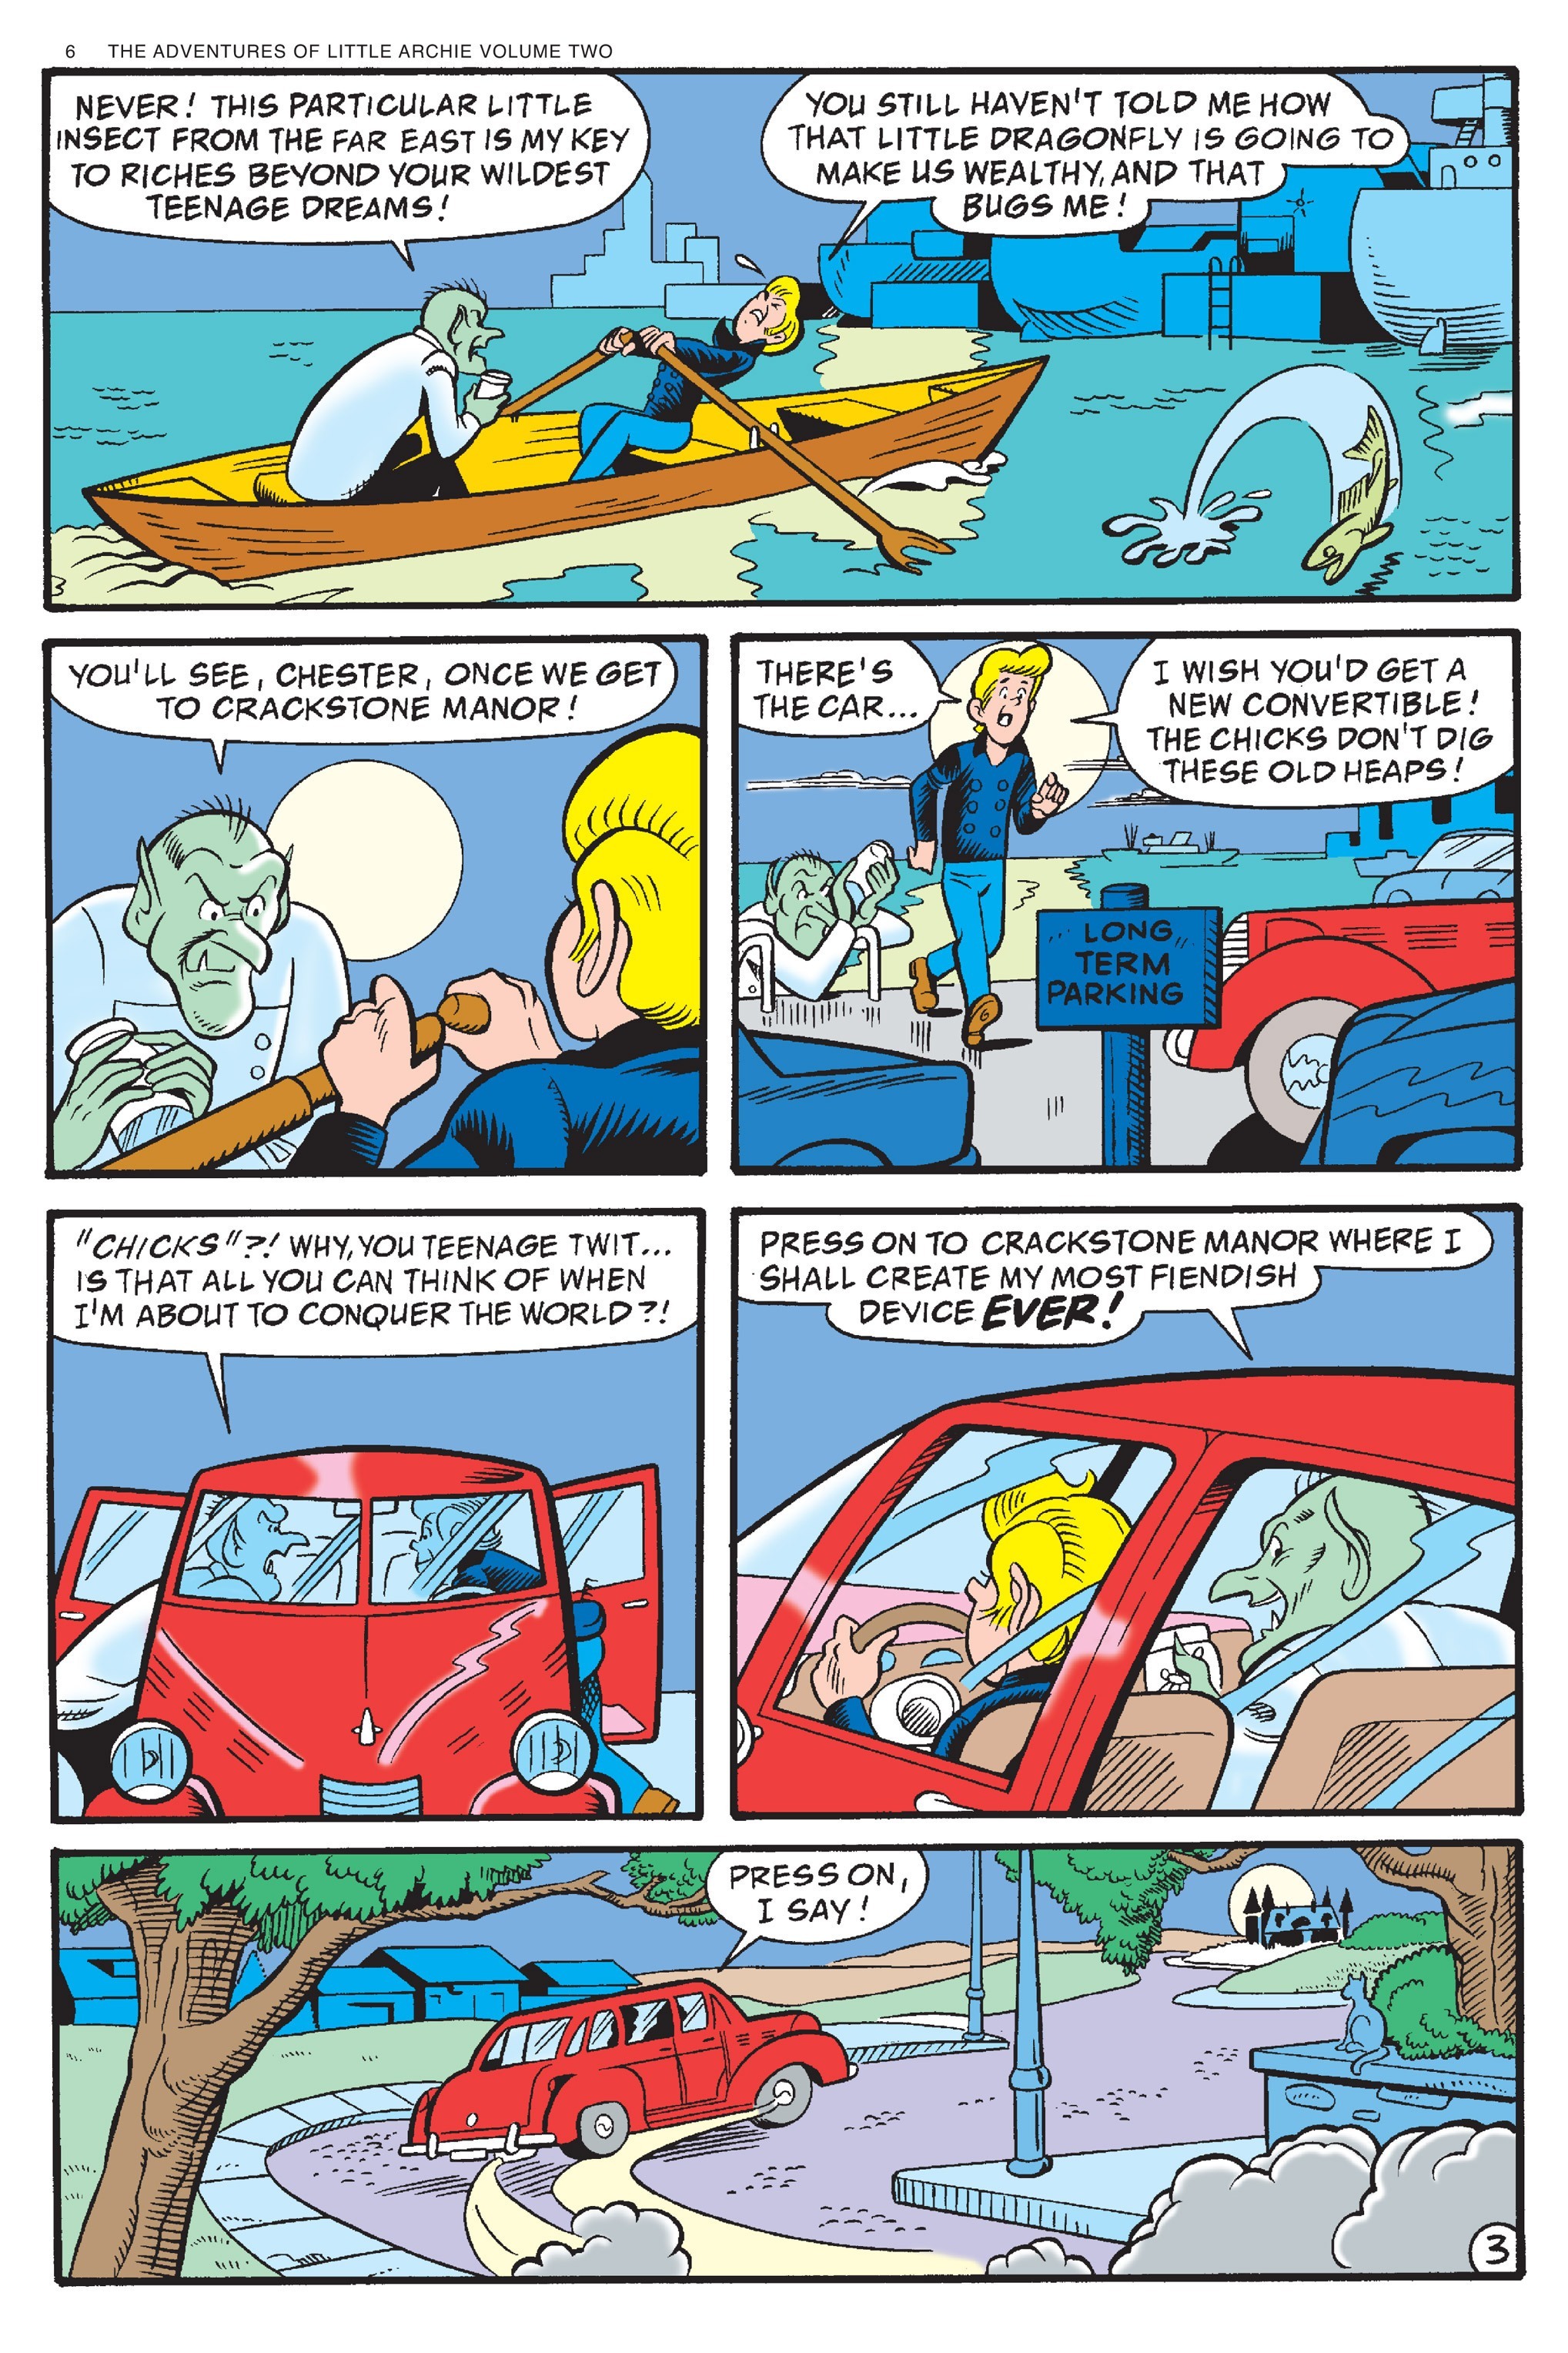 Read online Adventures of Little Archie comic -  Issue # TPB 2 - 7